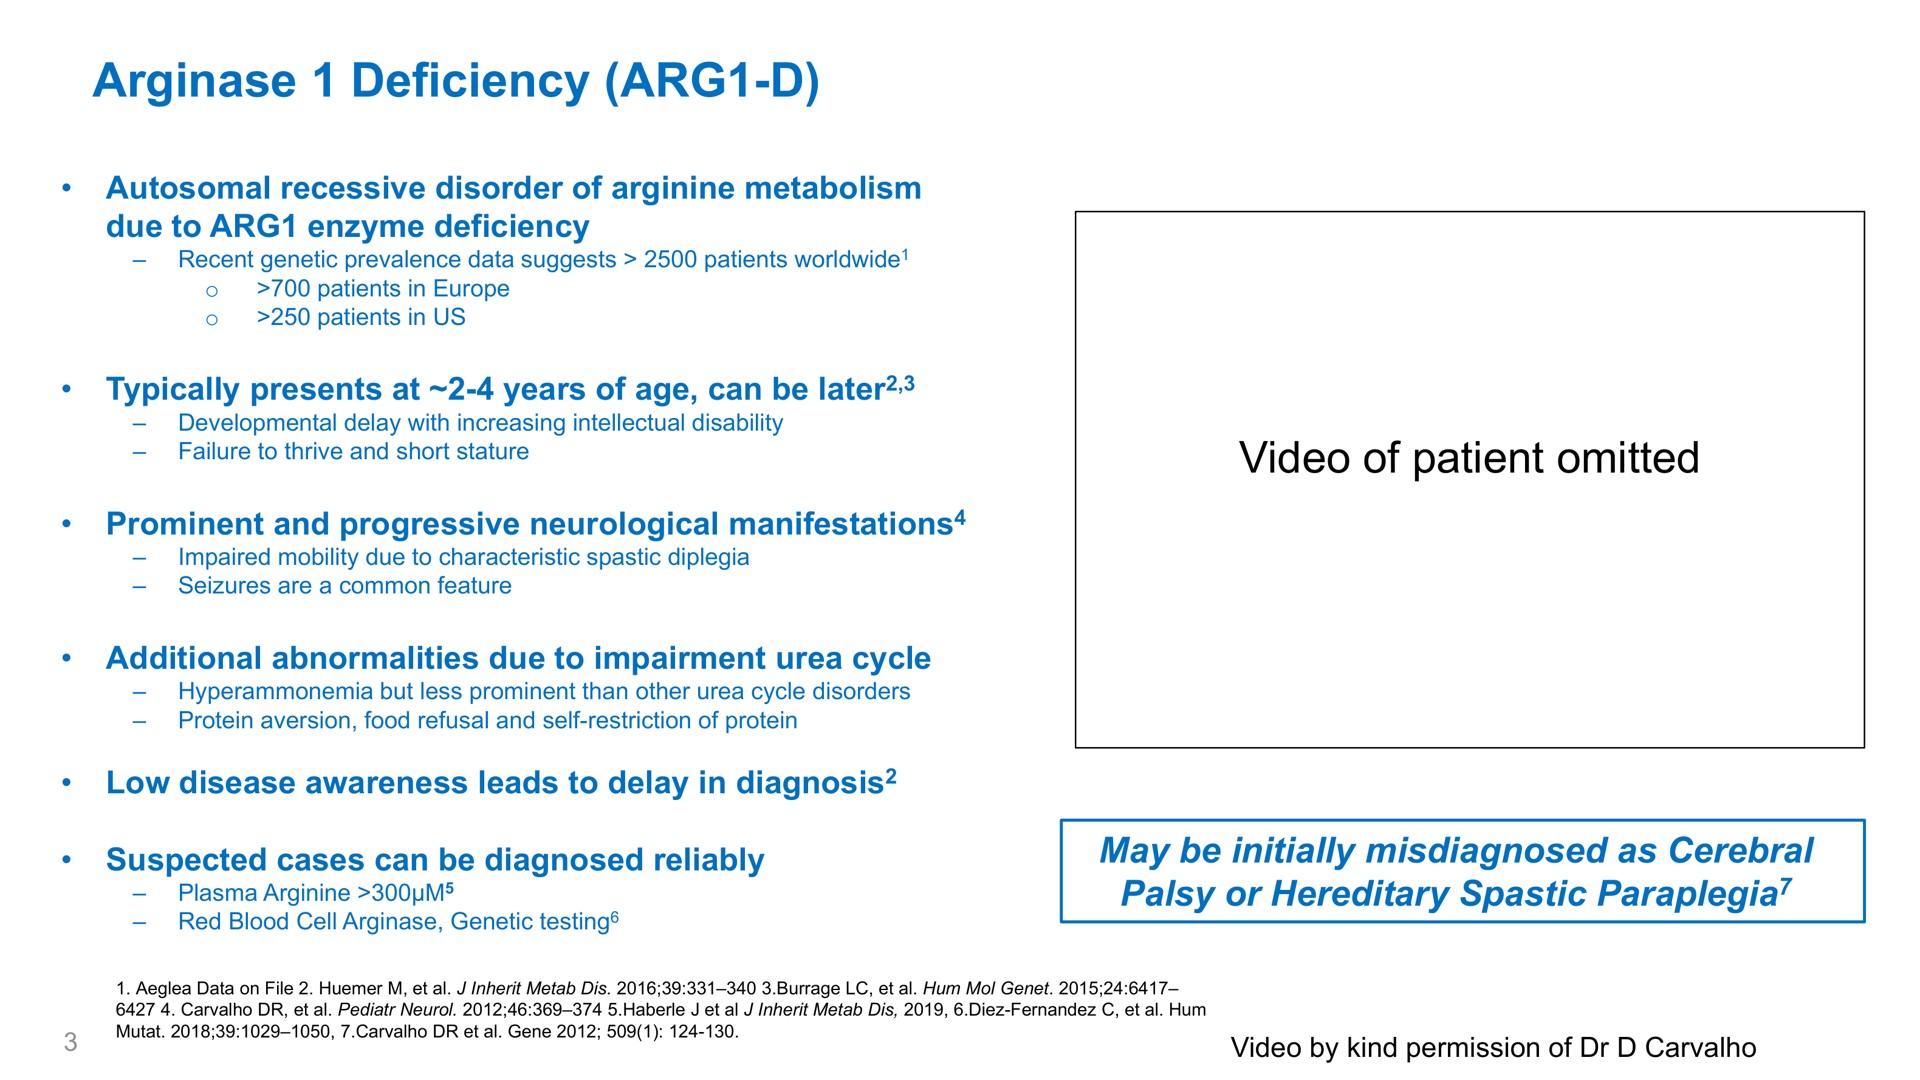 deficiency video of patient omitted | Aeglea BioTherapeutics